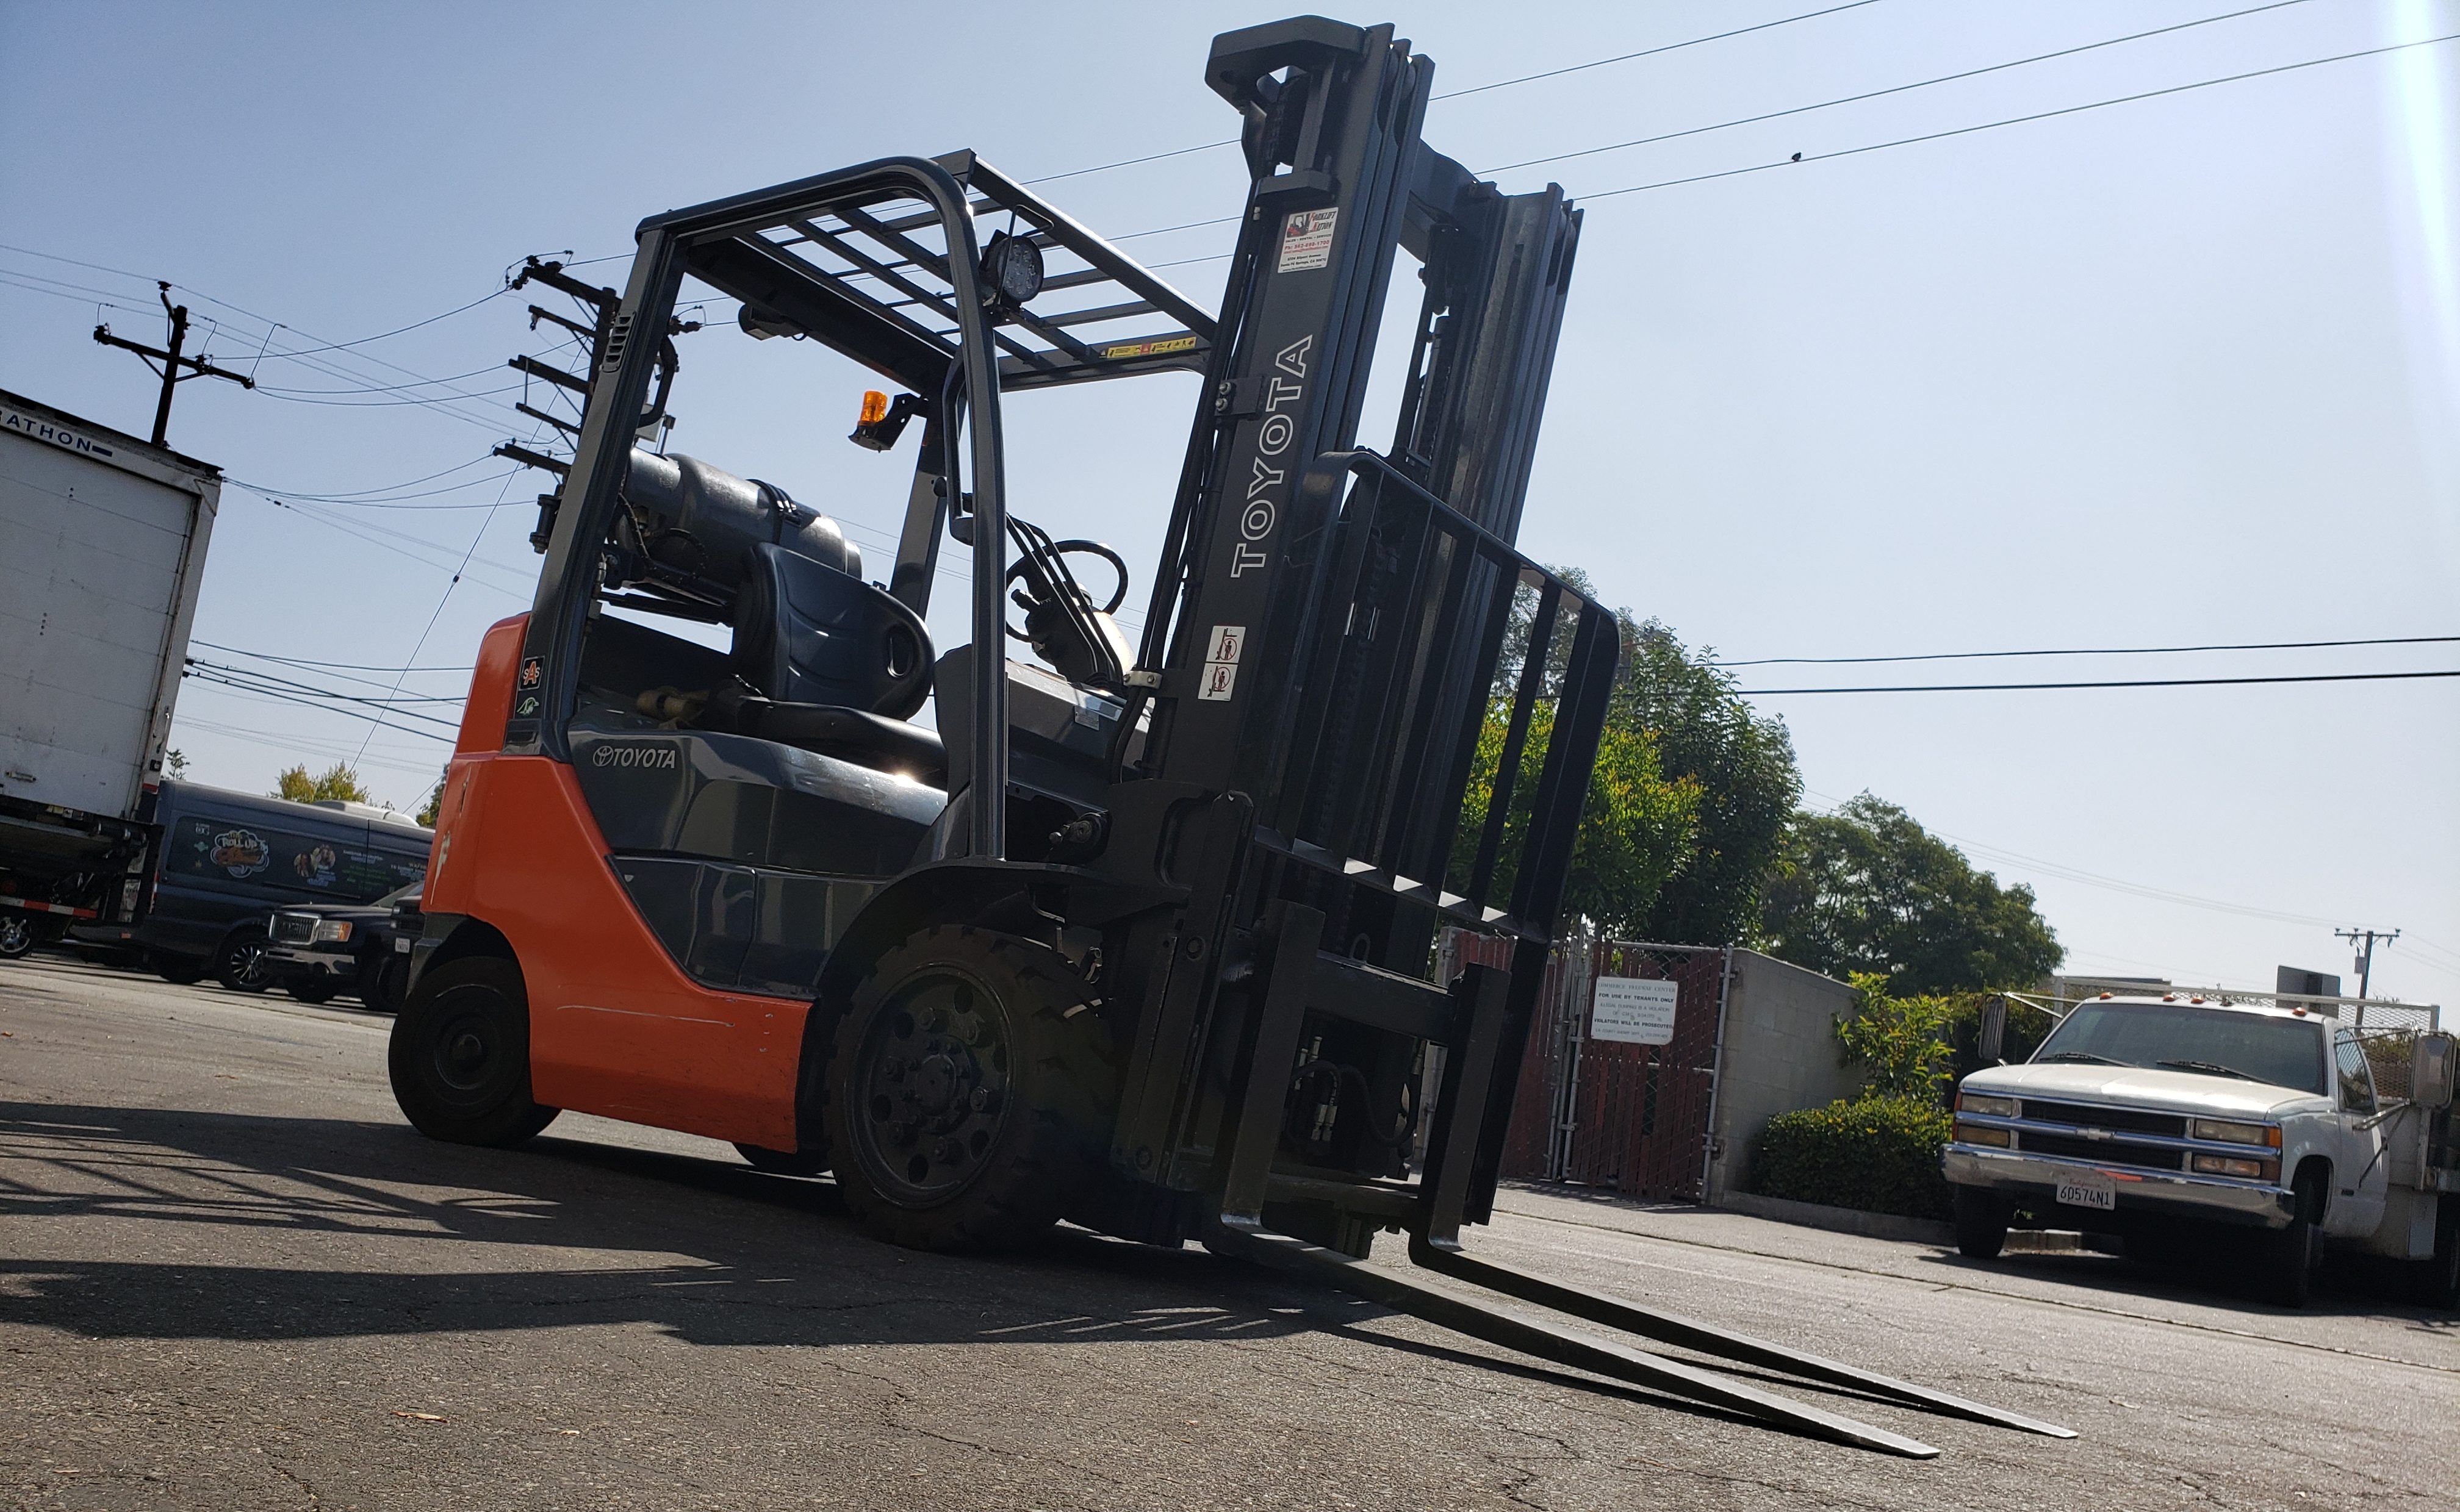 Sit Down Forklift Compton S Source For Forklift Training And Certification